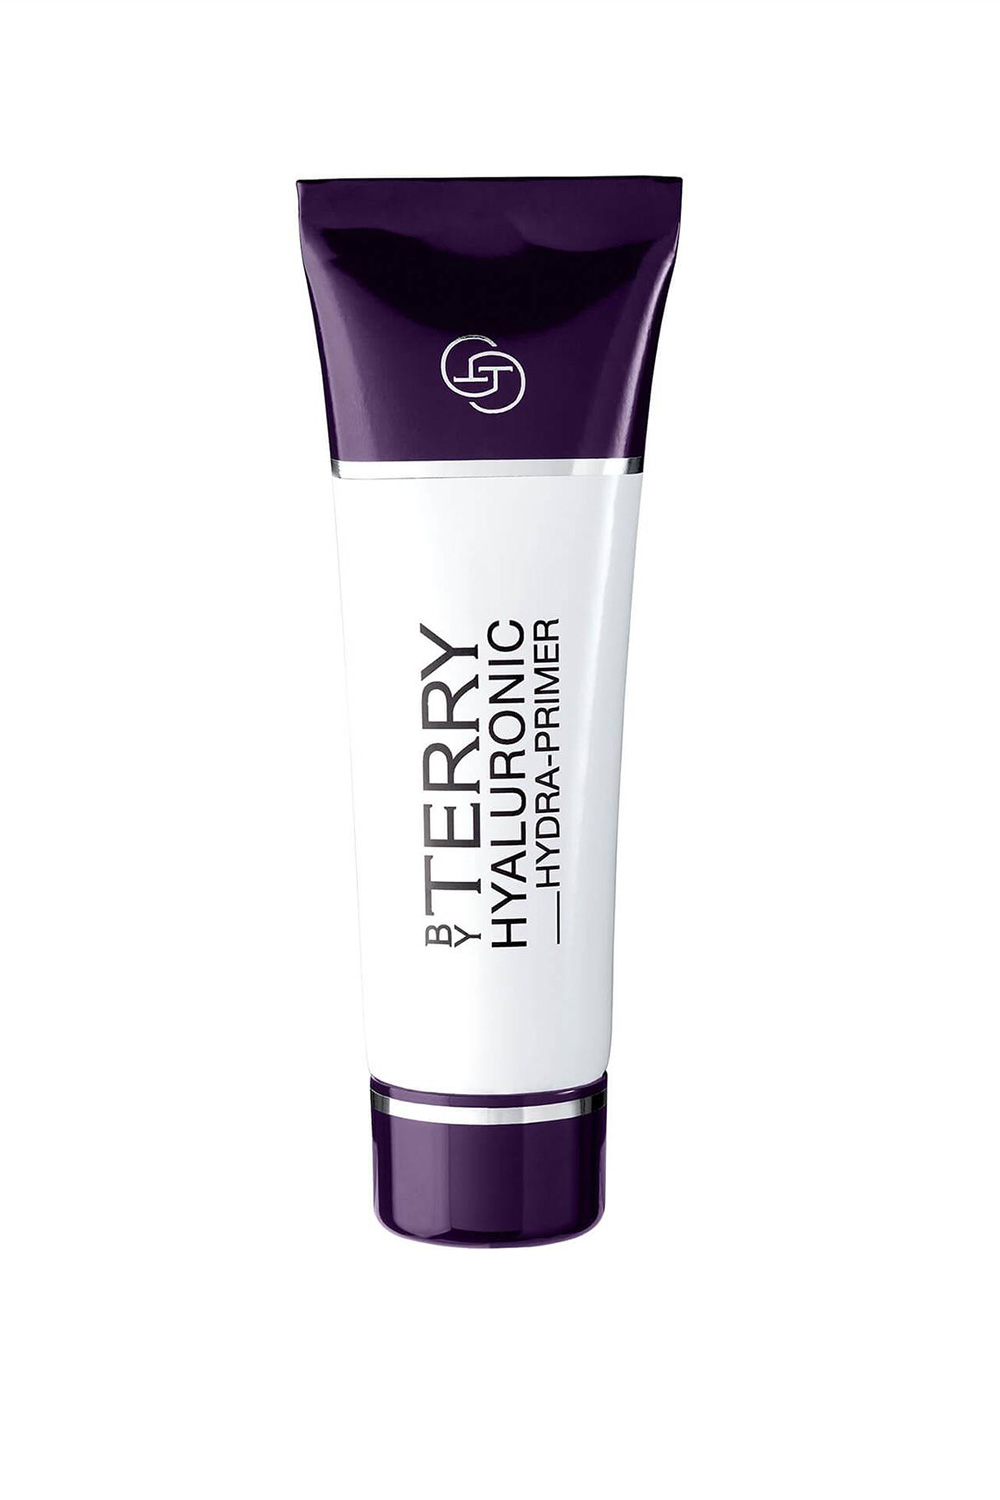 Feelthelion By Terry Hyaluronic Hydra-Primer dry skin cosmetics makeup 